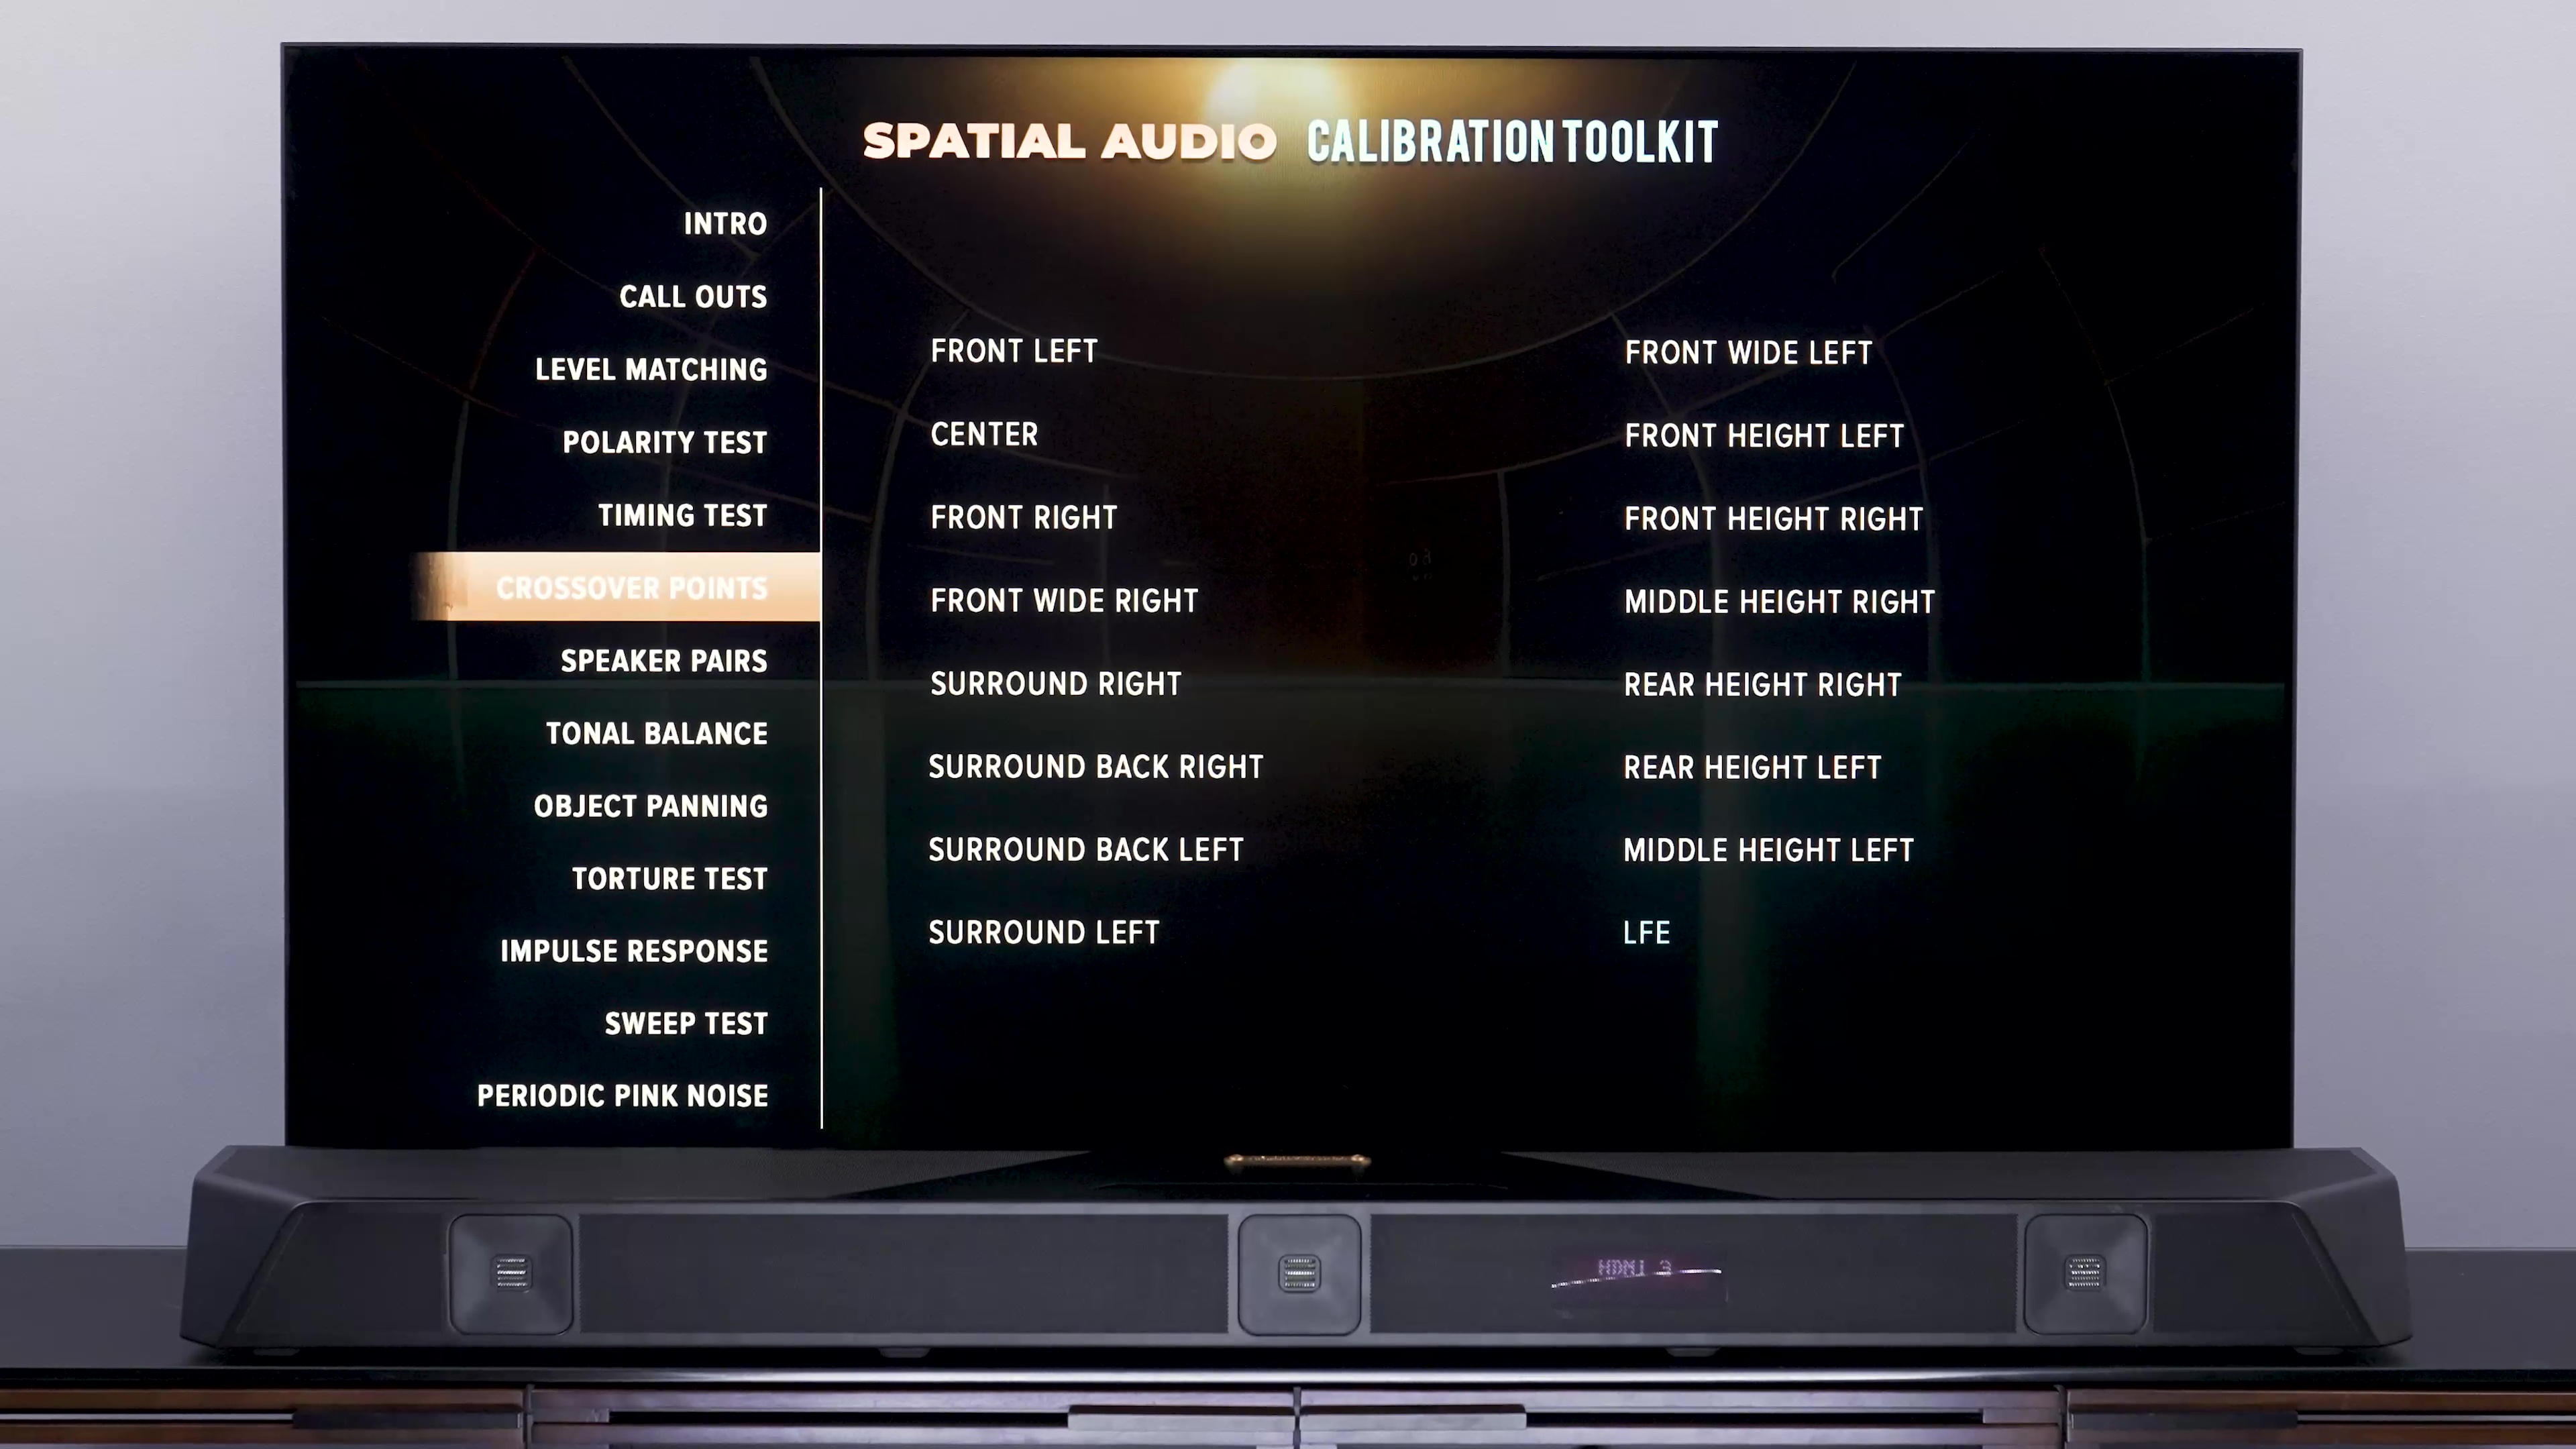 Spatial Audio Calibration Toolkit home screen.